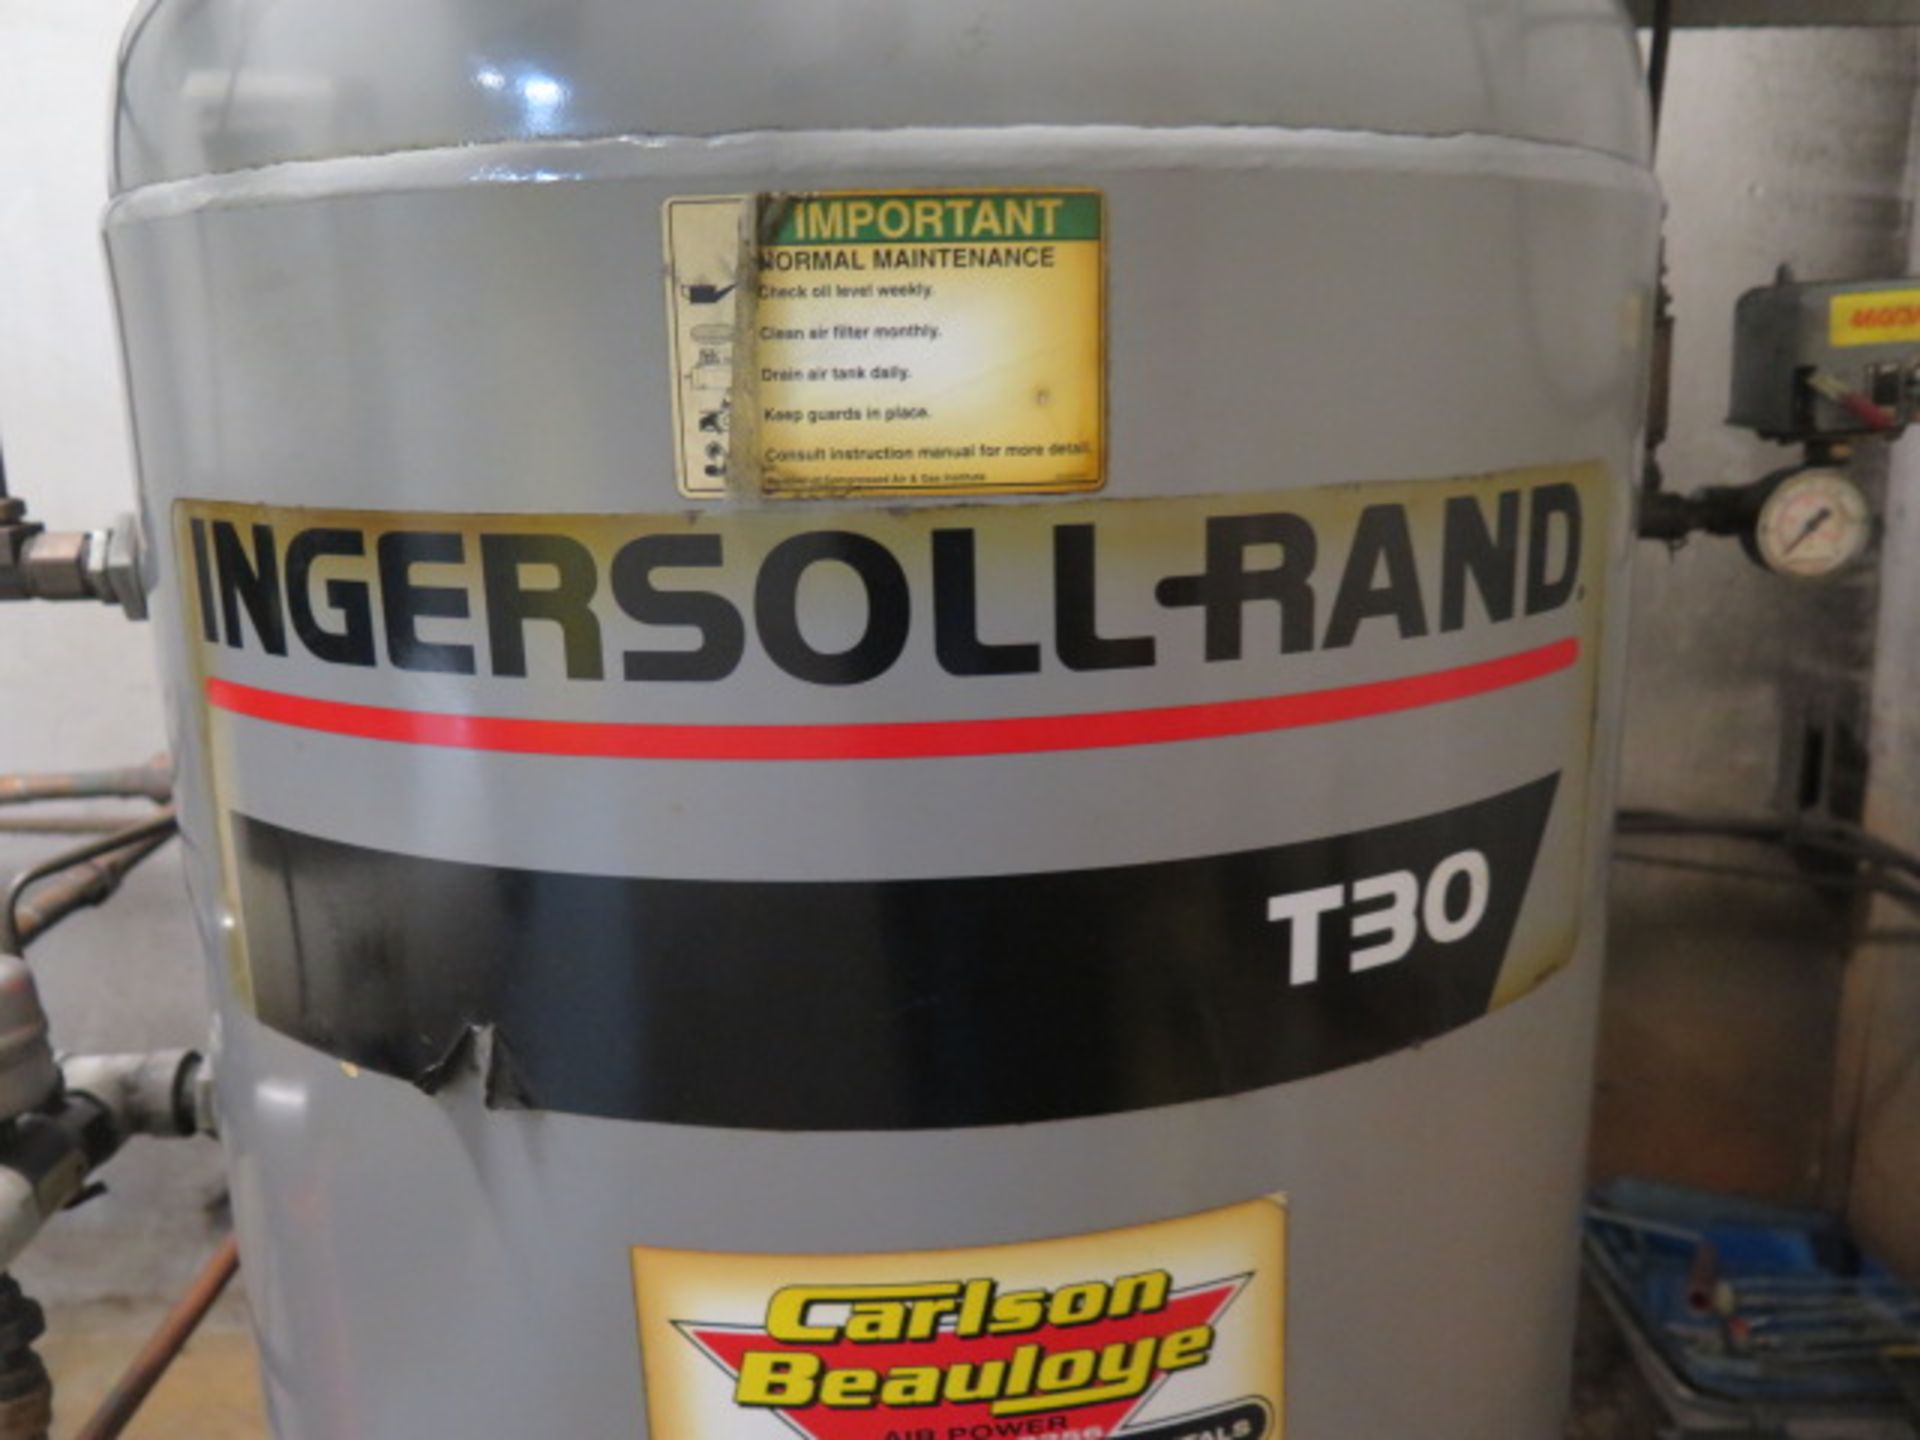 Ingersoll Rand T30 10Hp Vertical Air Compressor s/n 30T-889067 w/ 2-Stage Pump, 80 Gallon Tank - Image 5 of 5